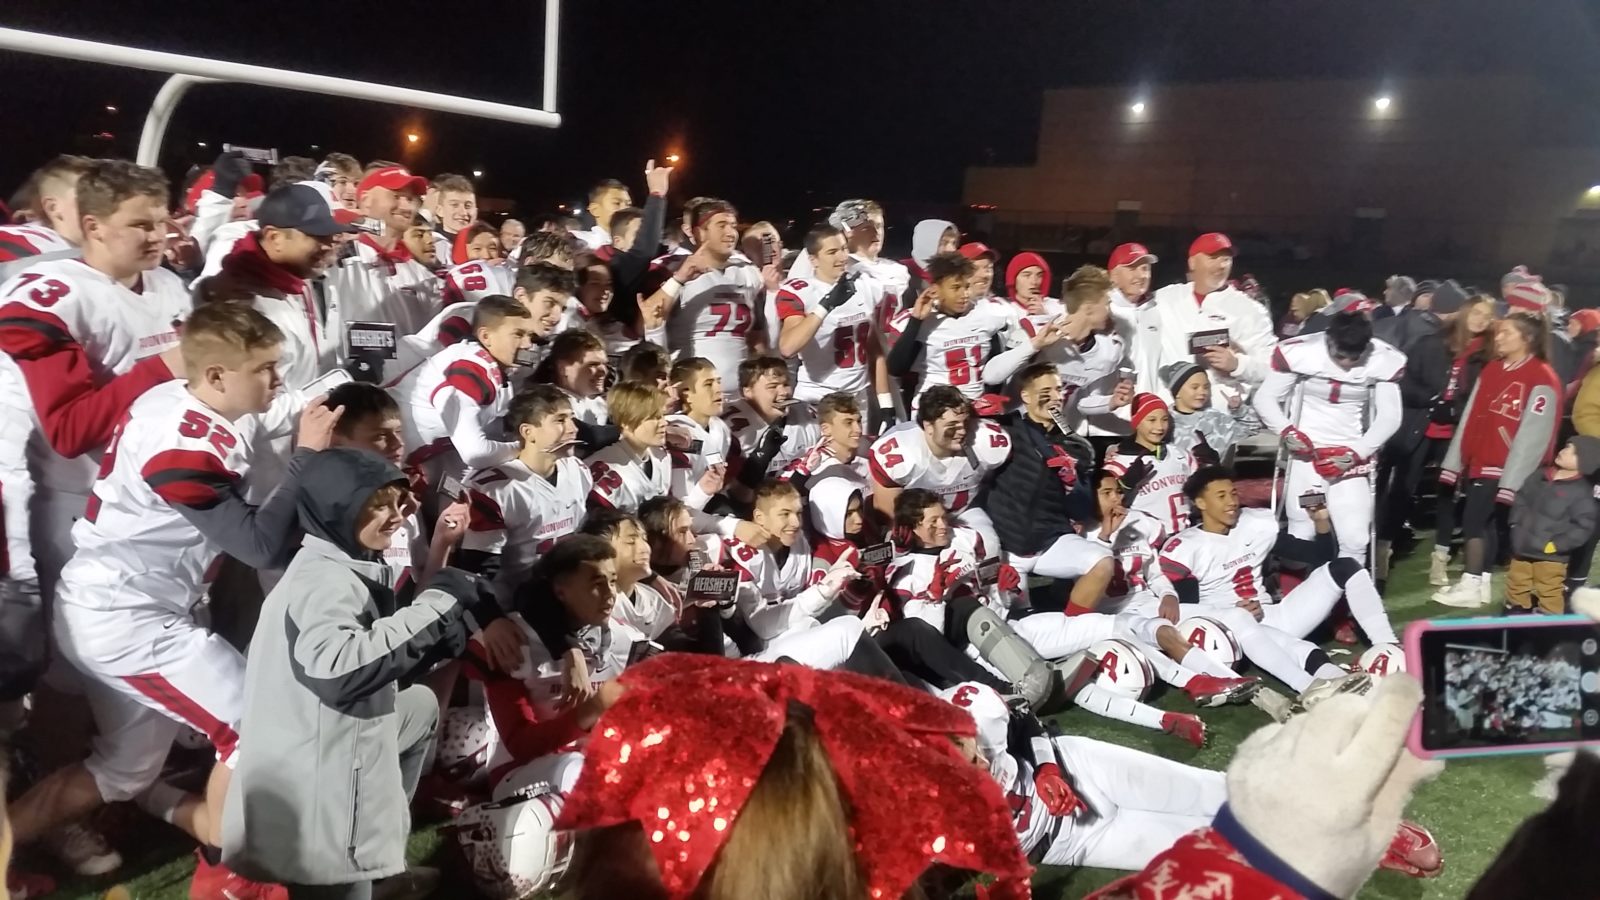 Avonworth advances to first state championship WilmingtonSD